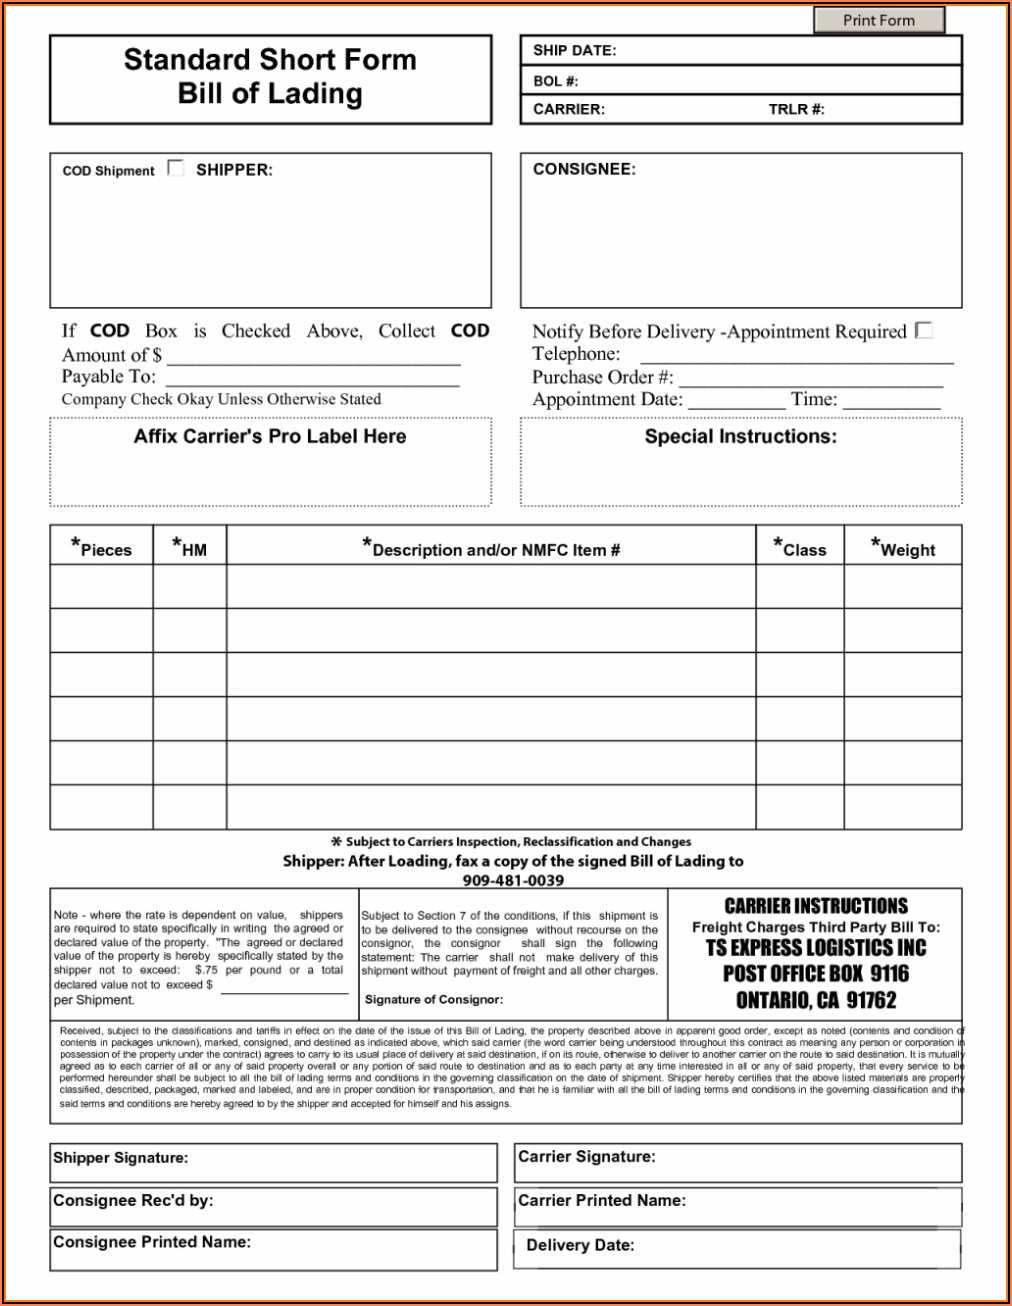 Straight Bill Of Lading Short Form Template Free